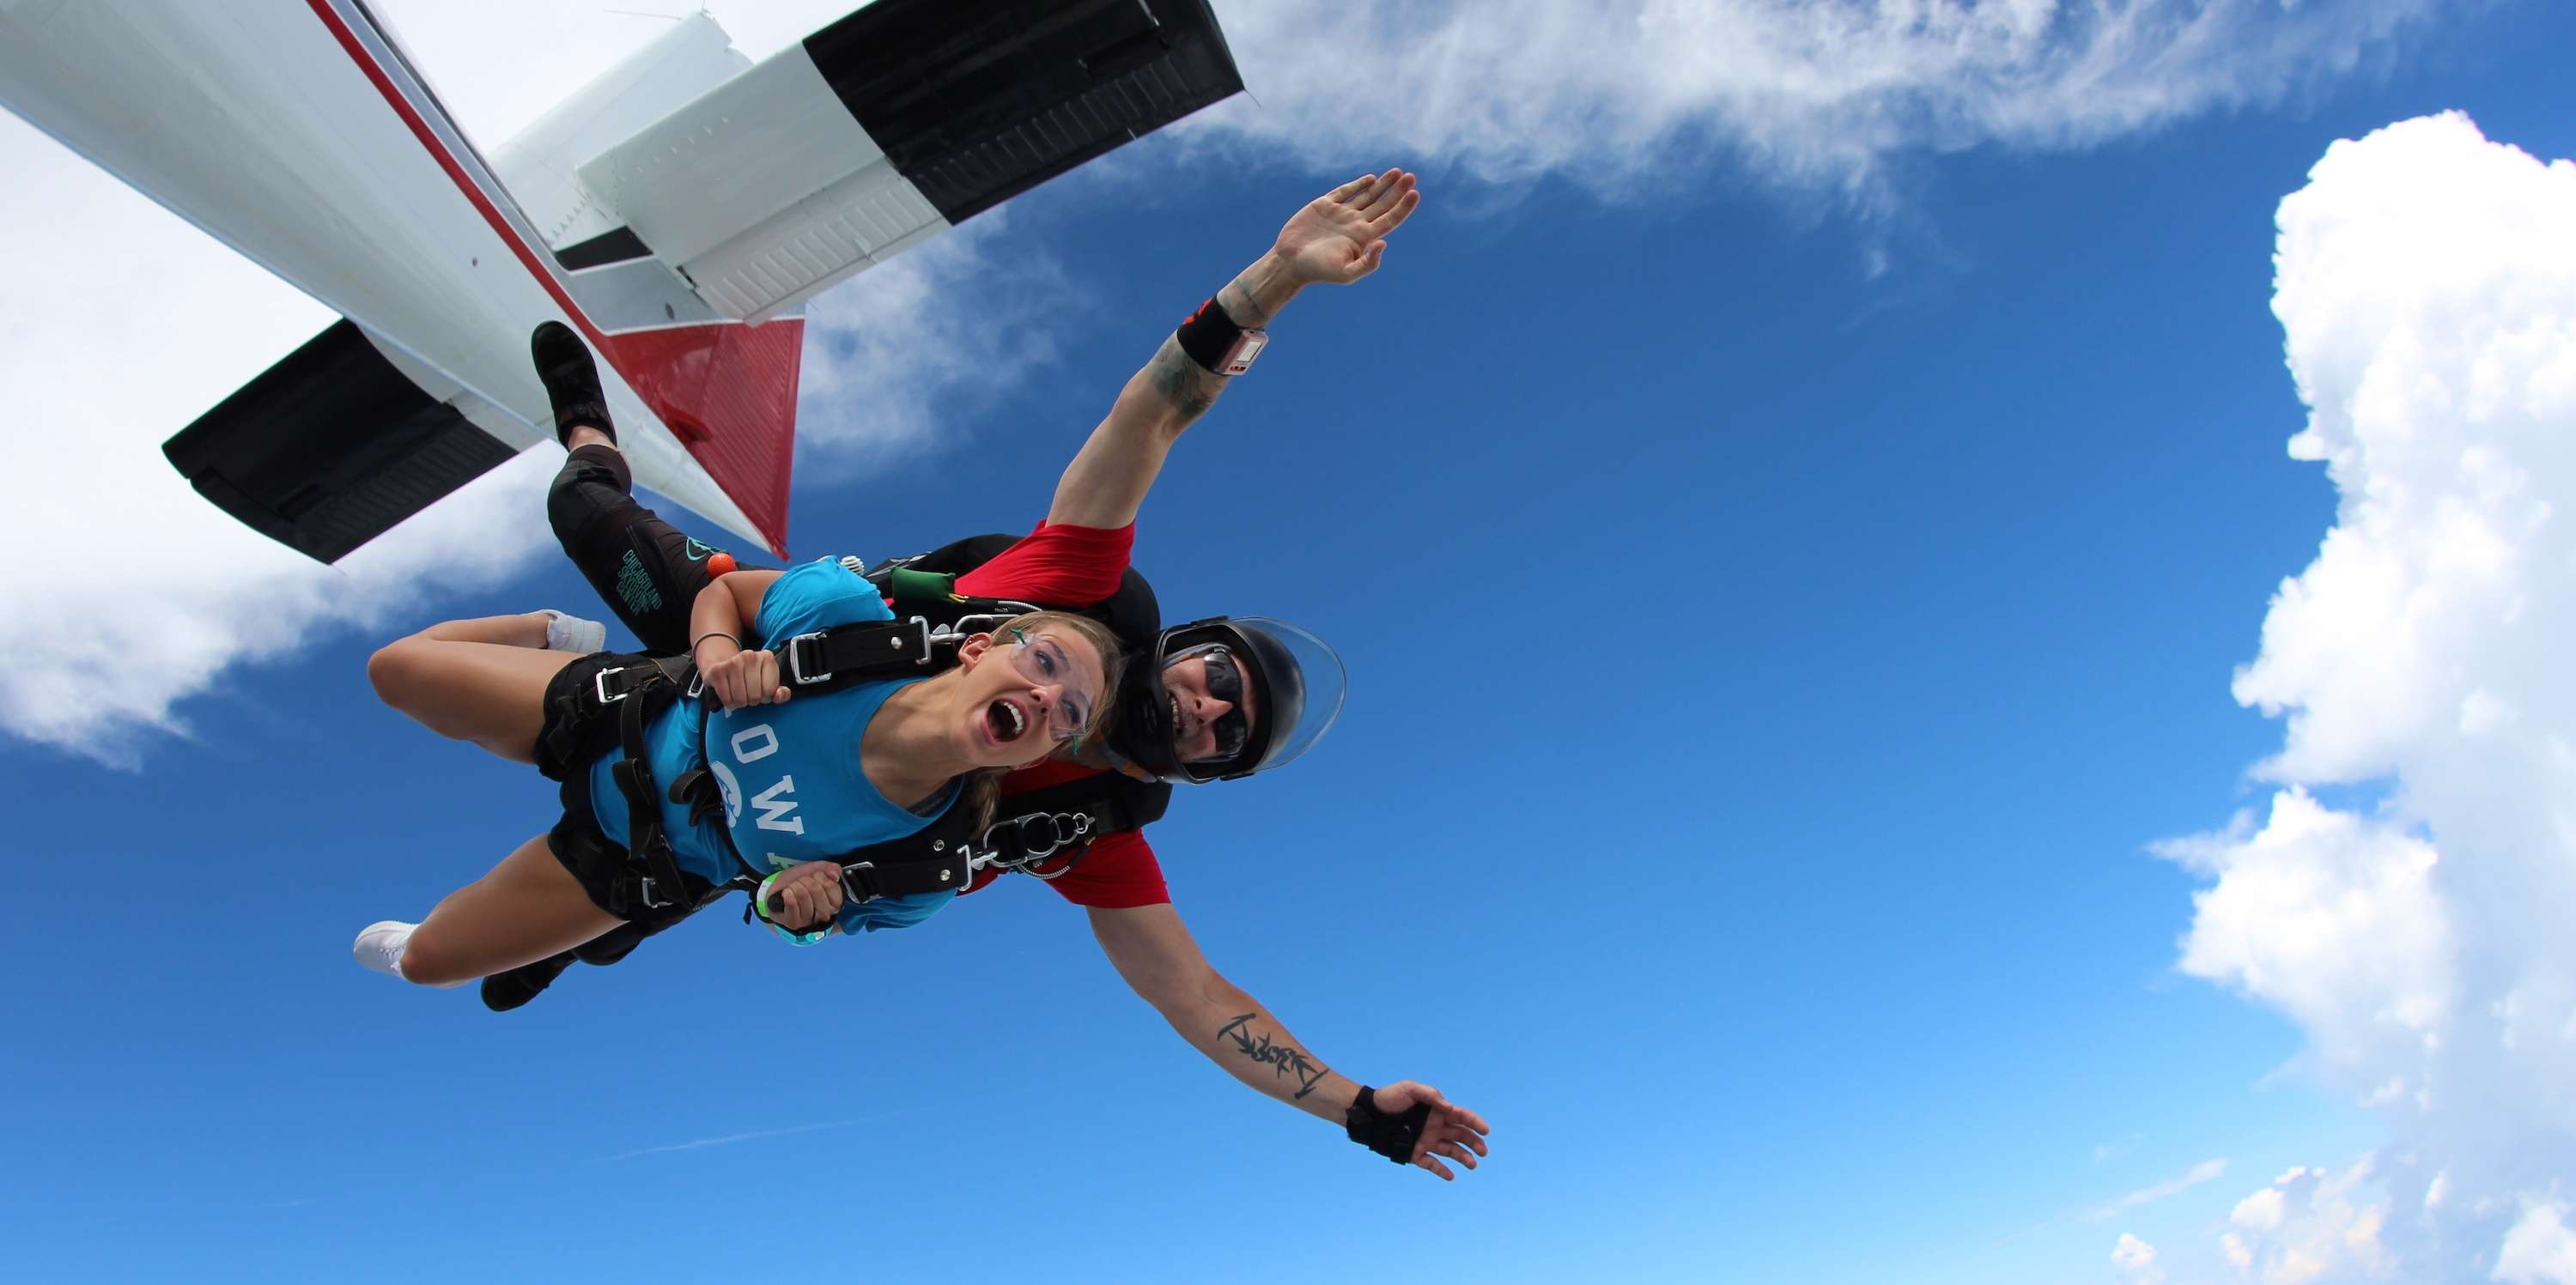 How Safe is Tandem Skydiving? 6 Reasons to Trust Your Instructor